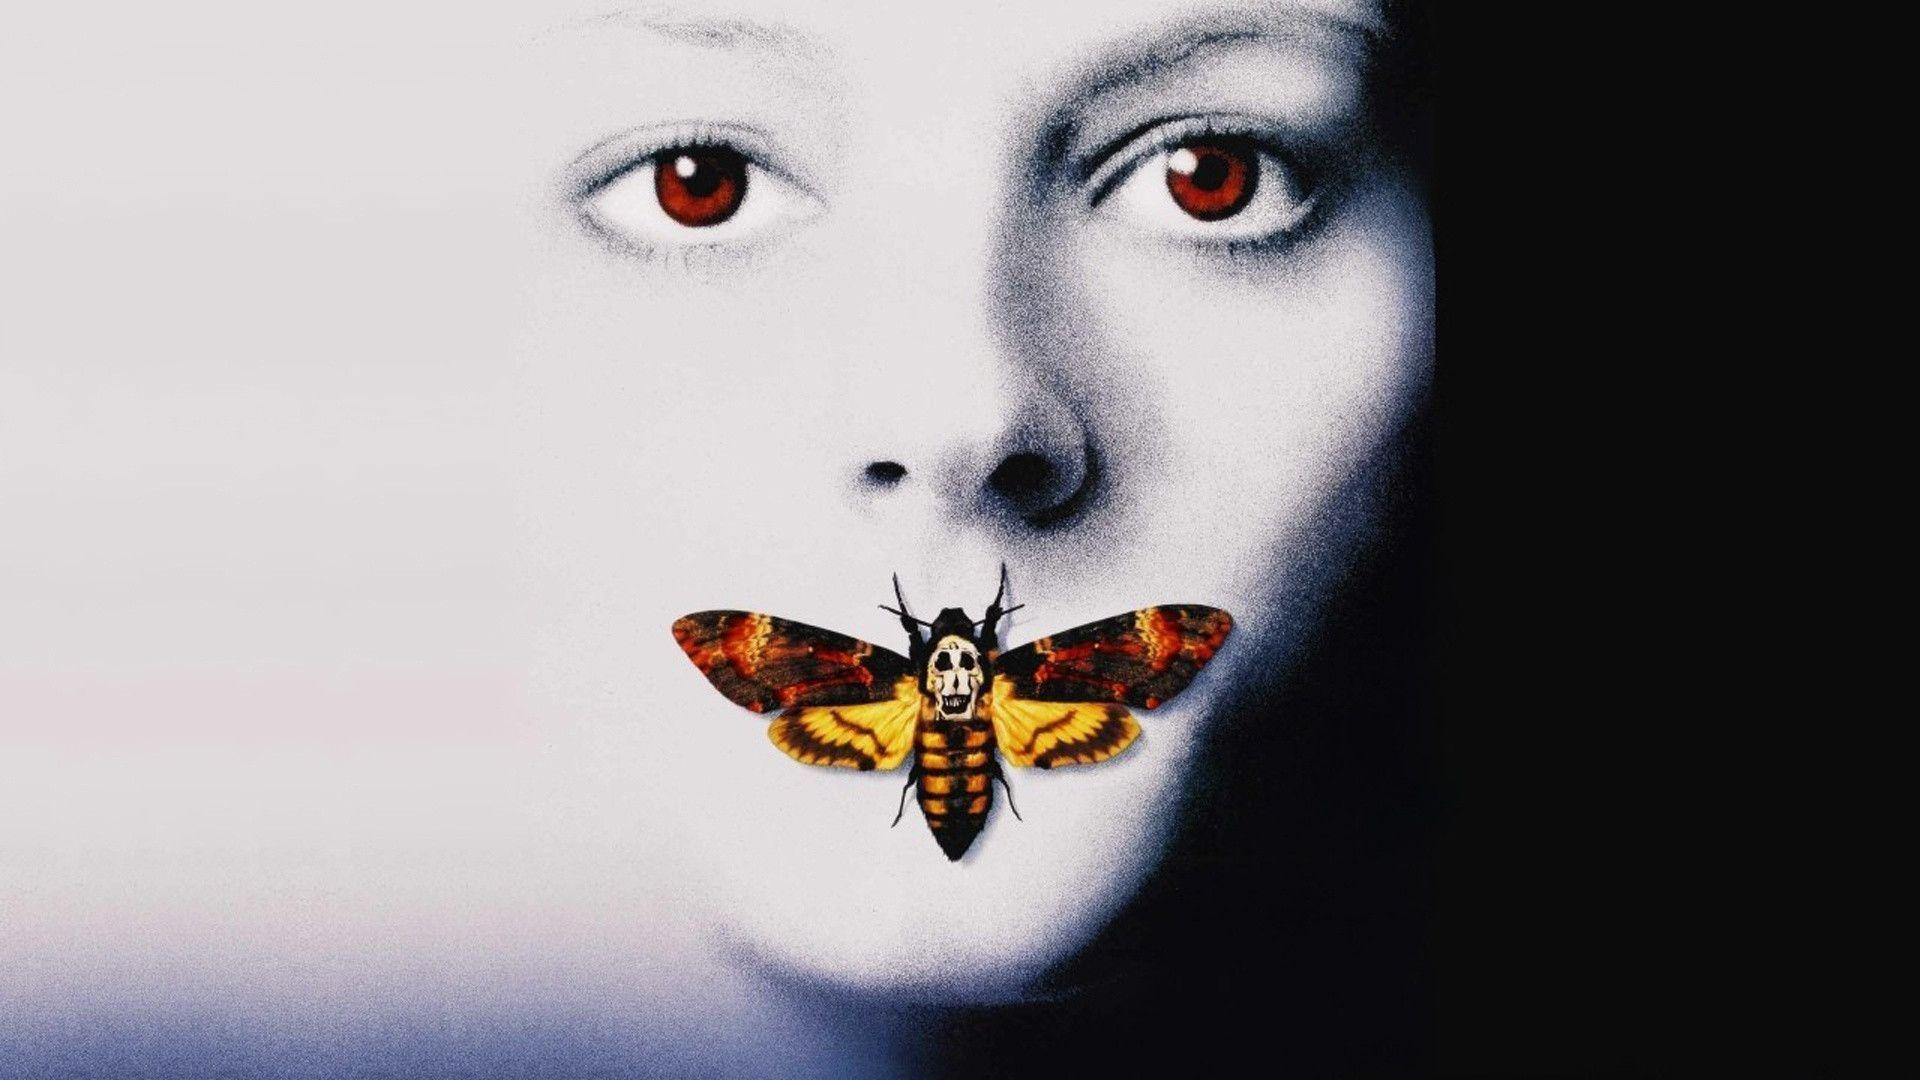 the silence of the lambs wallpaper